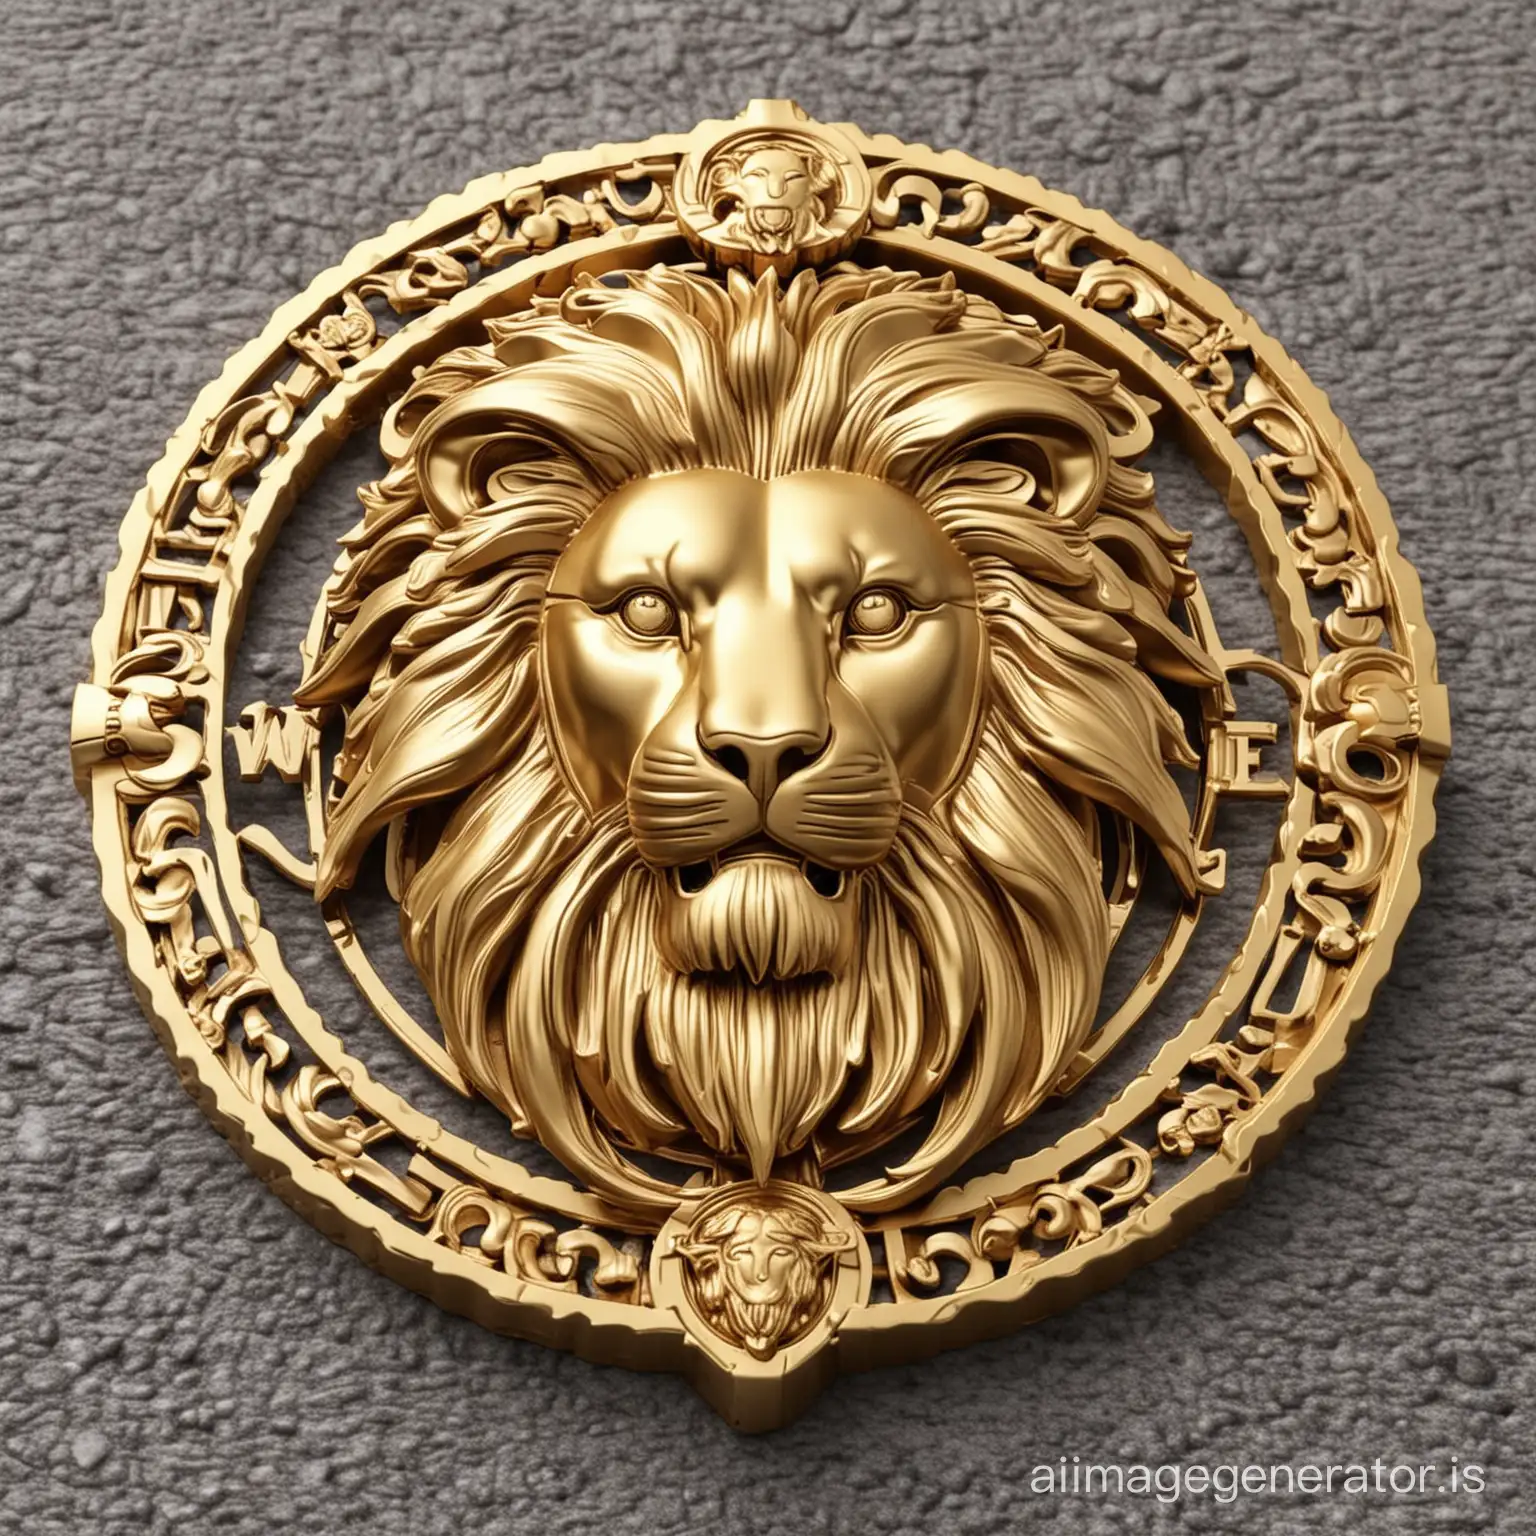 Luxurious-Lion-Logo-Design-in-Versace-Style-with-Gold-Coloring